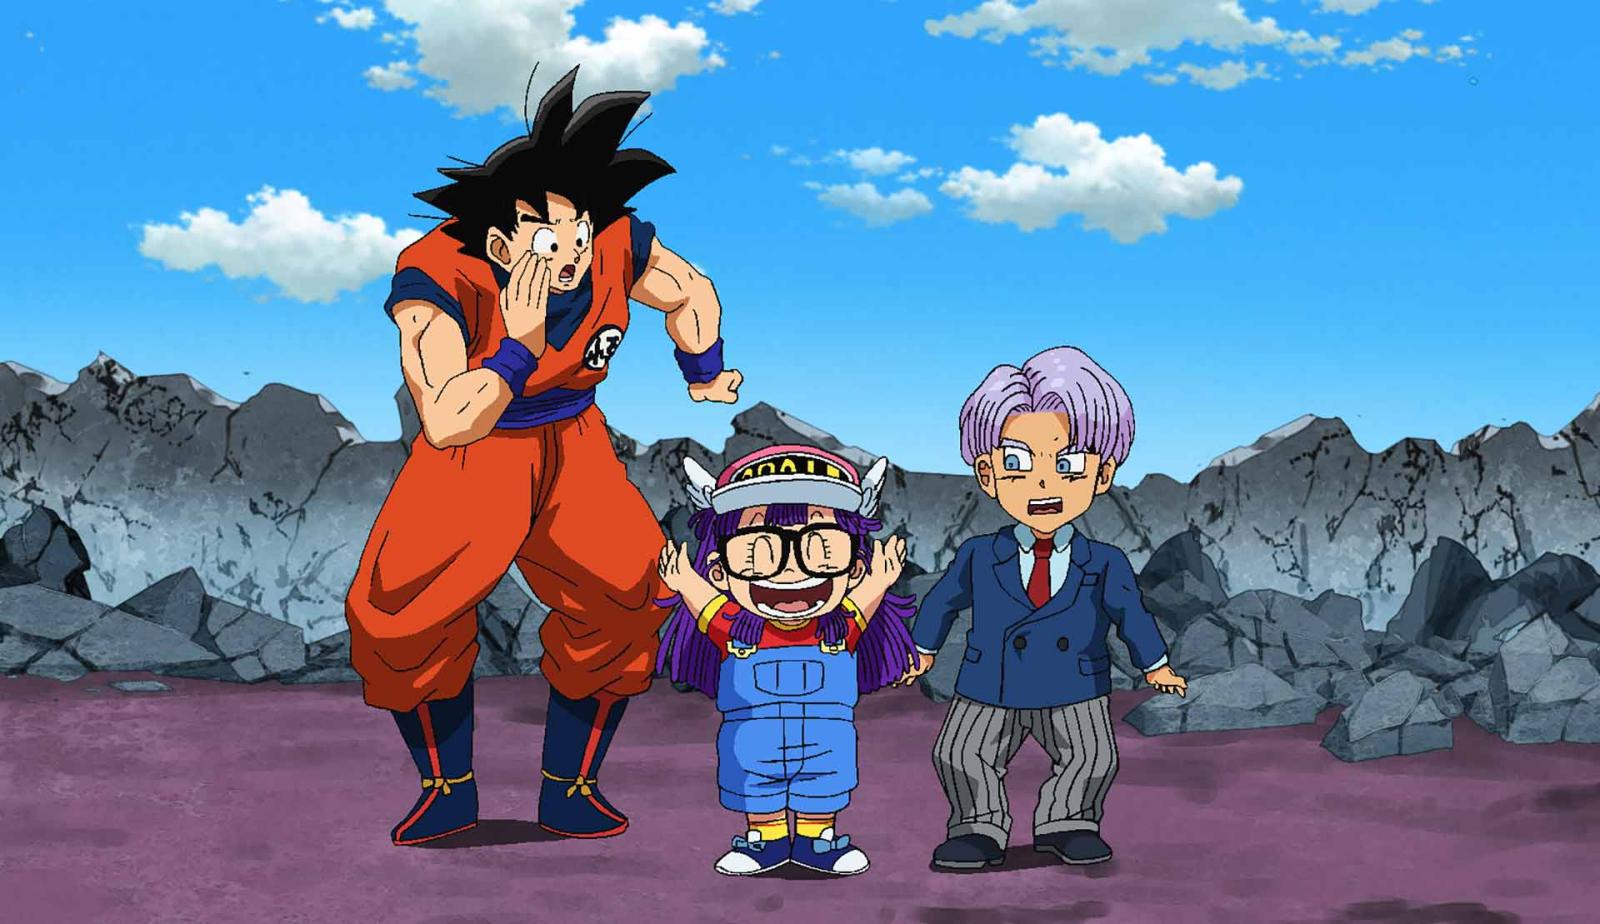 Dragon Ball Super - Volume 6 - Limited Edition 3 DVD + Card + Booklet (DVD) Image 4